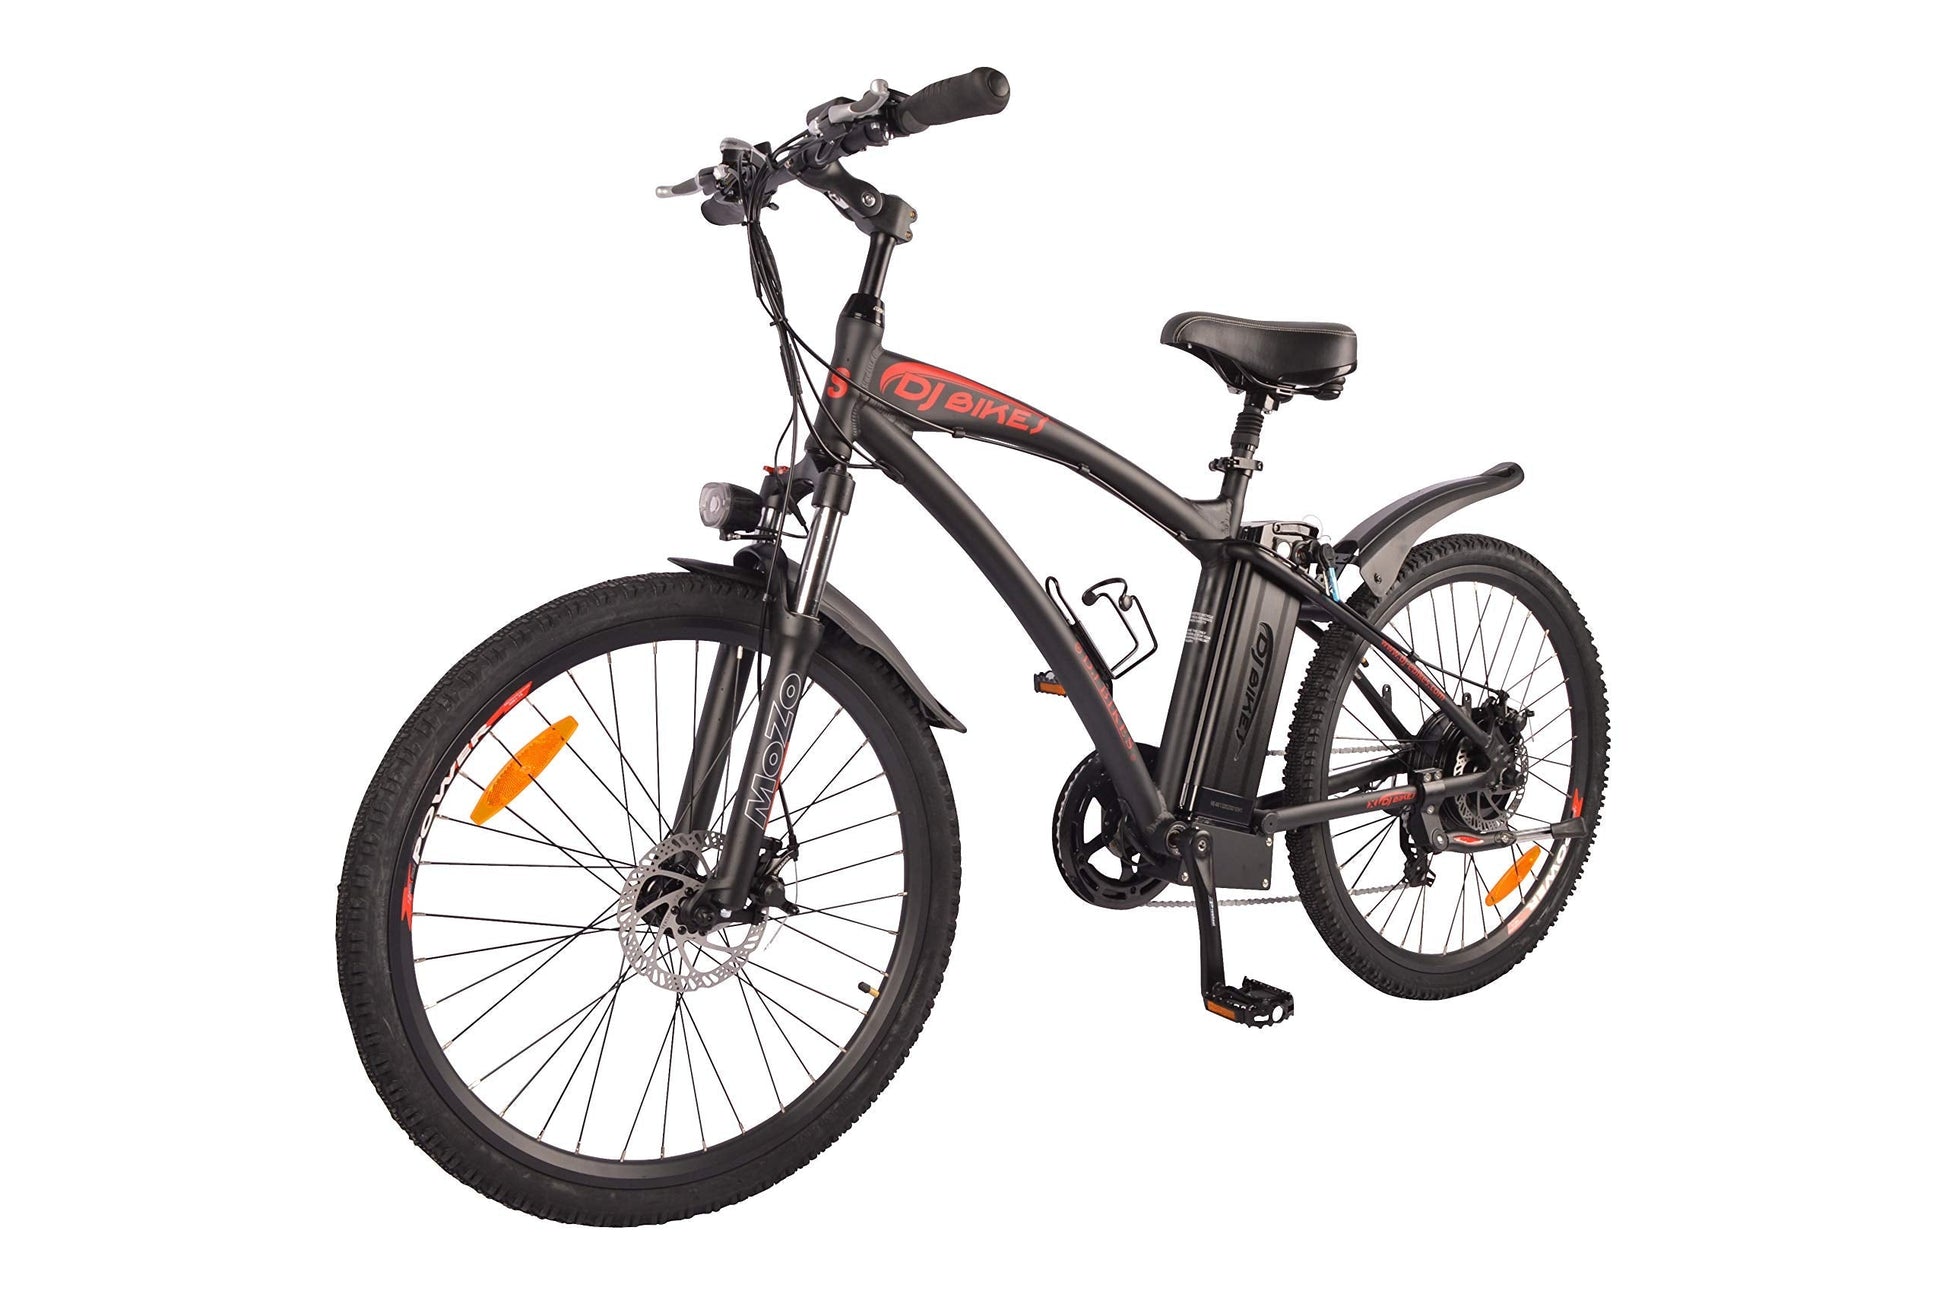 DJ Mountain Bike 750W 48V 13Ah Power Electric Bicycle, Matte Black, LED Bike Light, Fork Suspension and Shimano Gear, | Decor Gifts and More